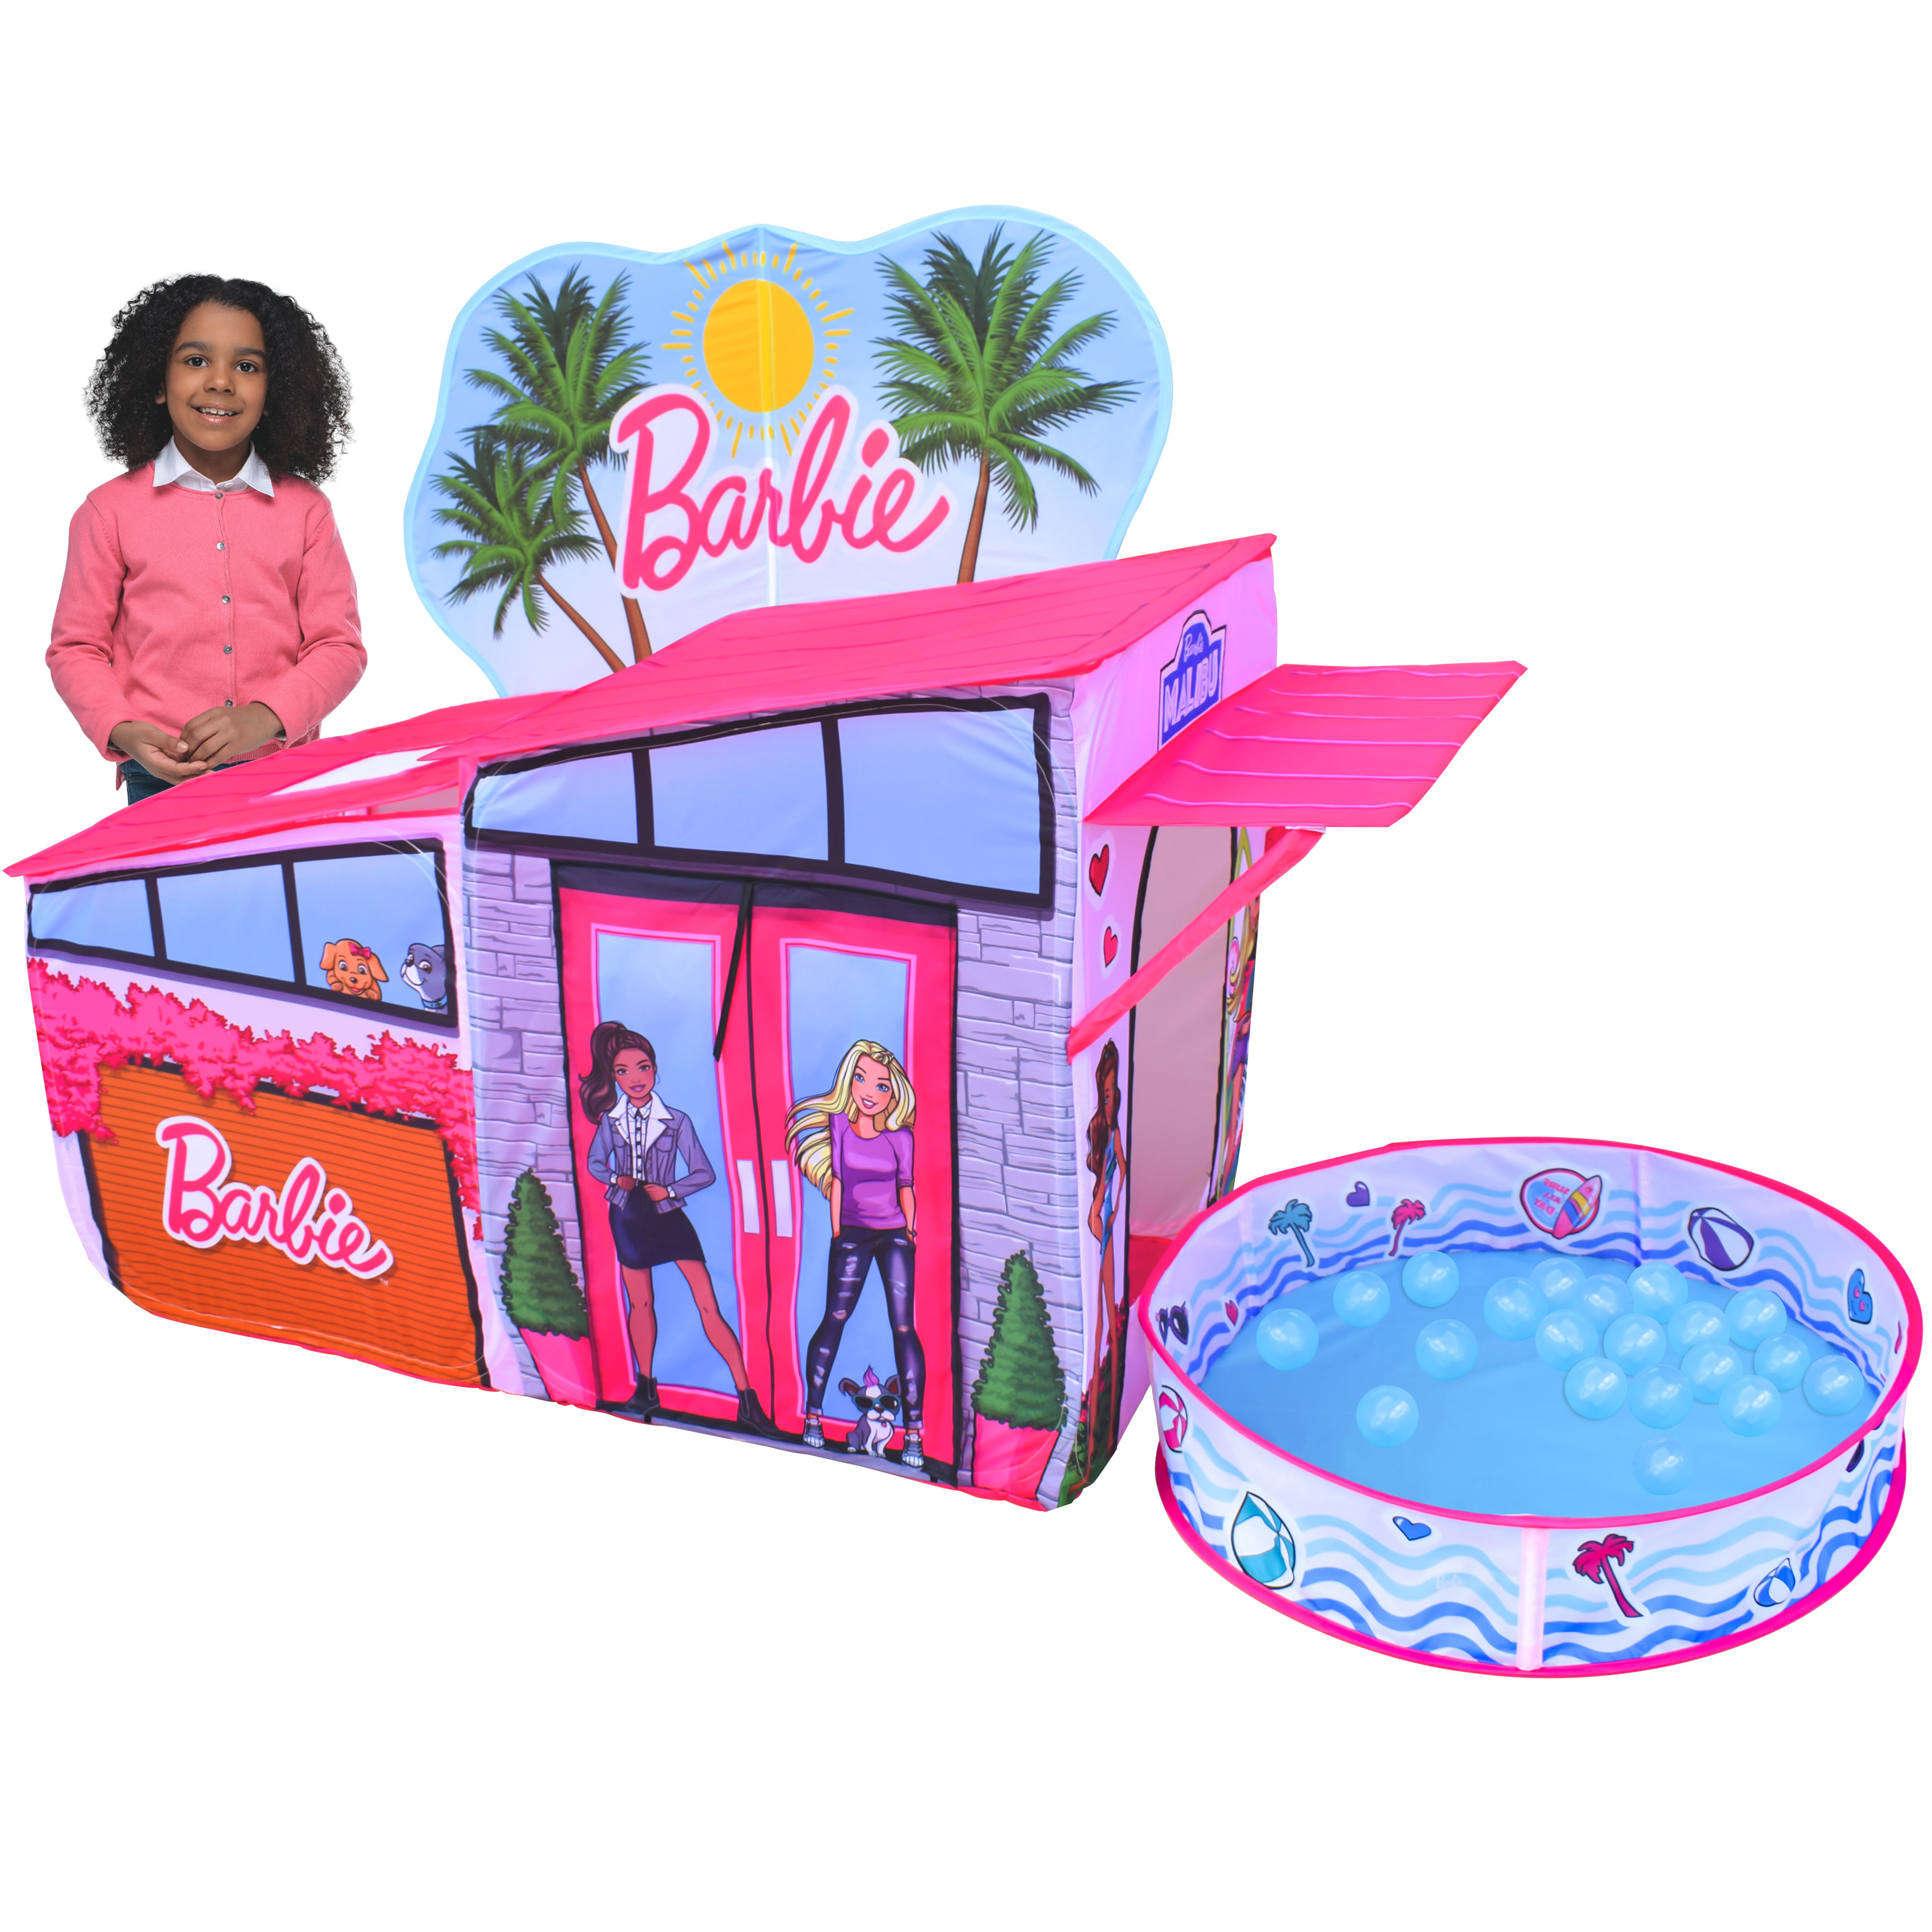 Barbie Dreamhouse 7' Pop-Up Play Tent, Easy Assembly Includes 20 Plastic Balls, Children Ages 3+ - image 4 of 10